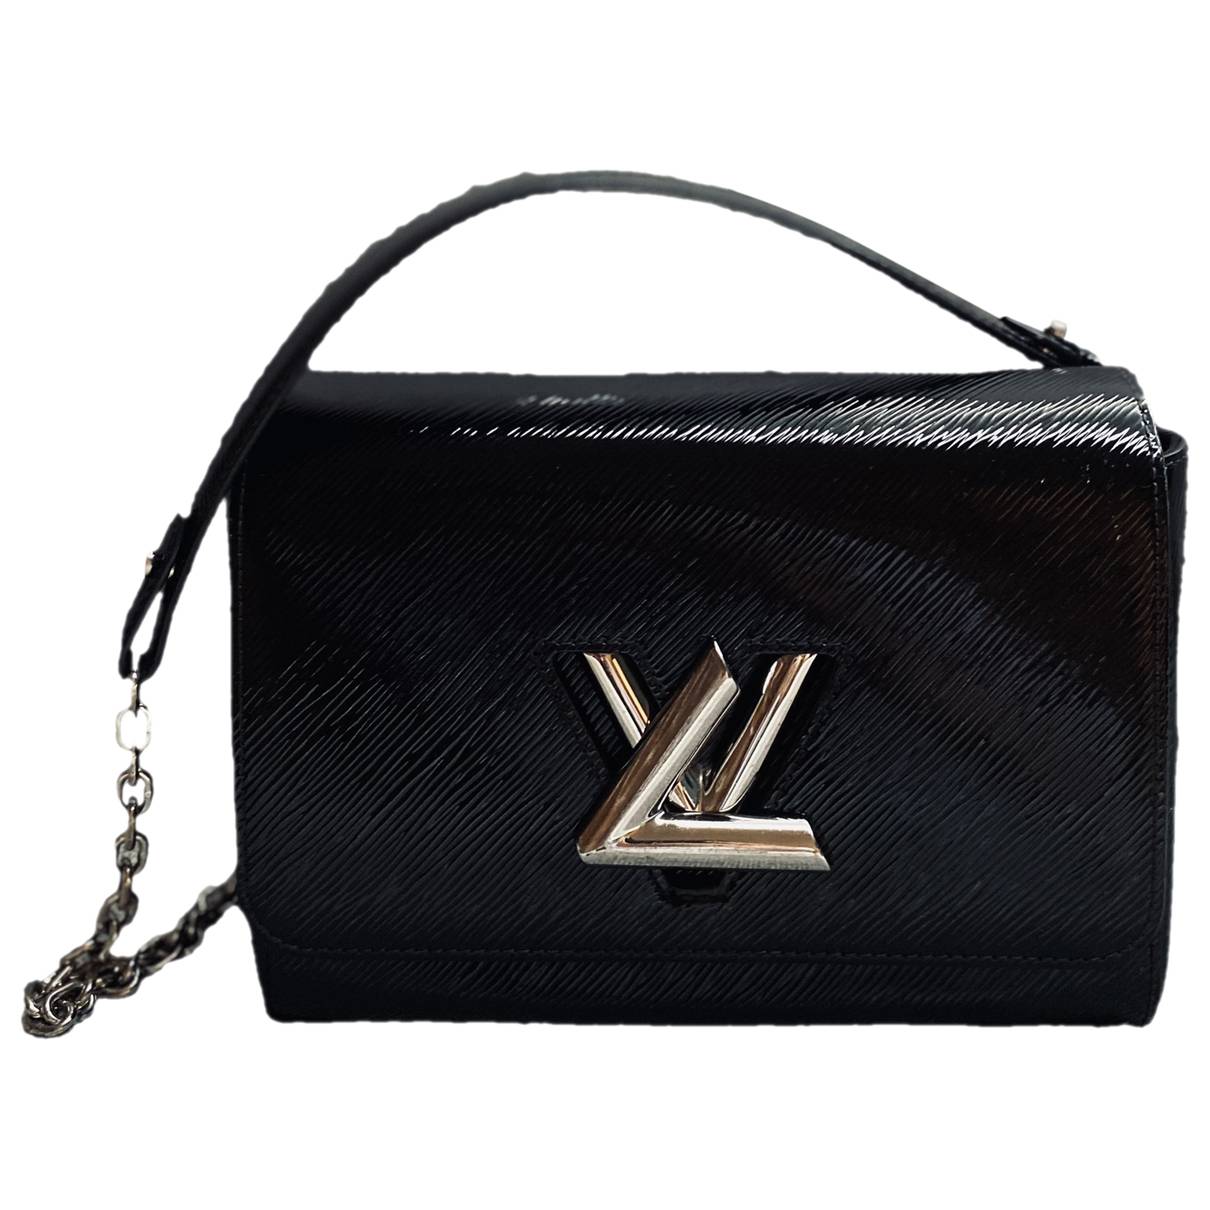 Louis+Vuitton+Twist+Crossbody+MM+White+Leather for sale online